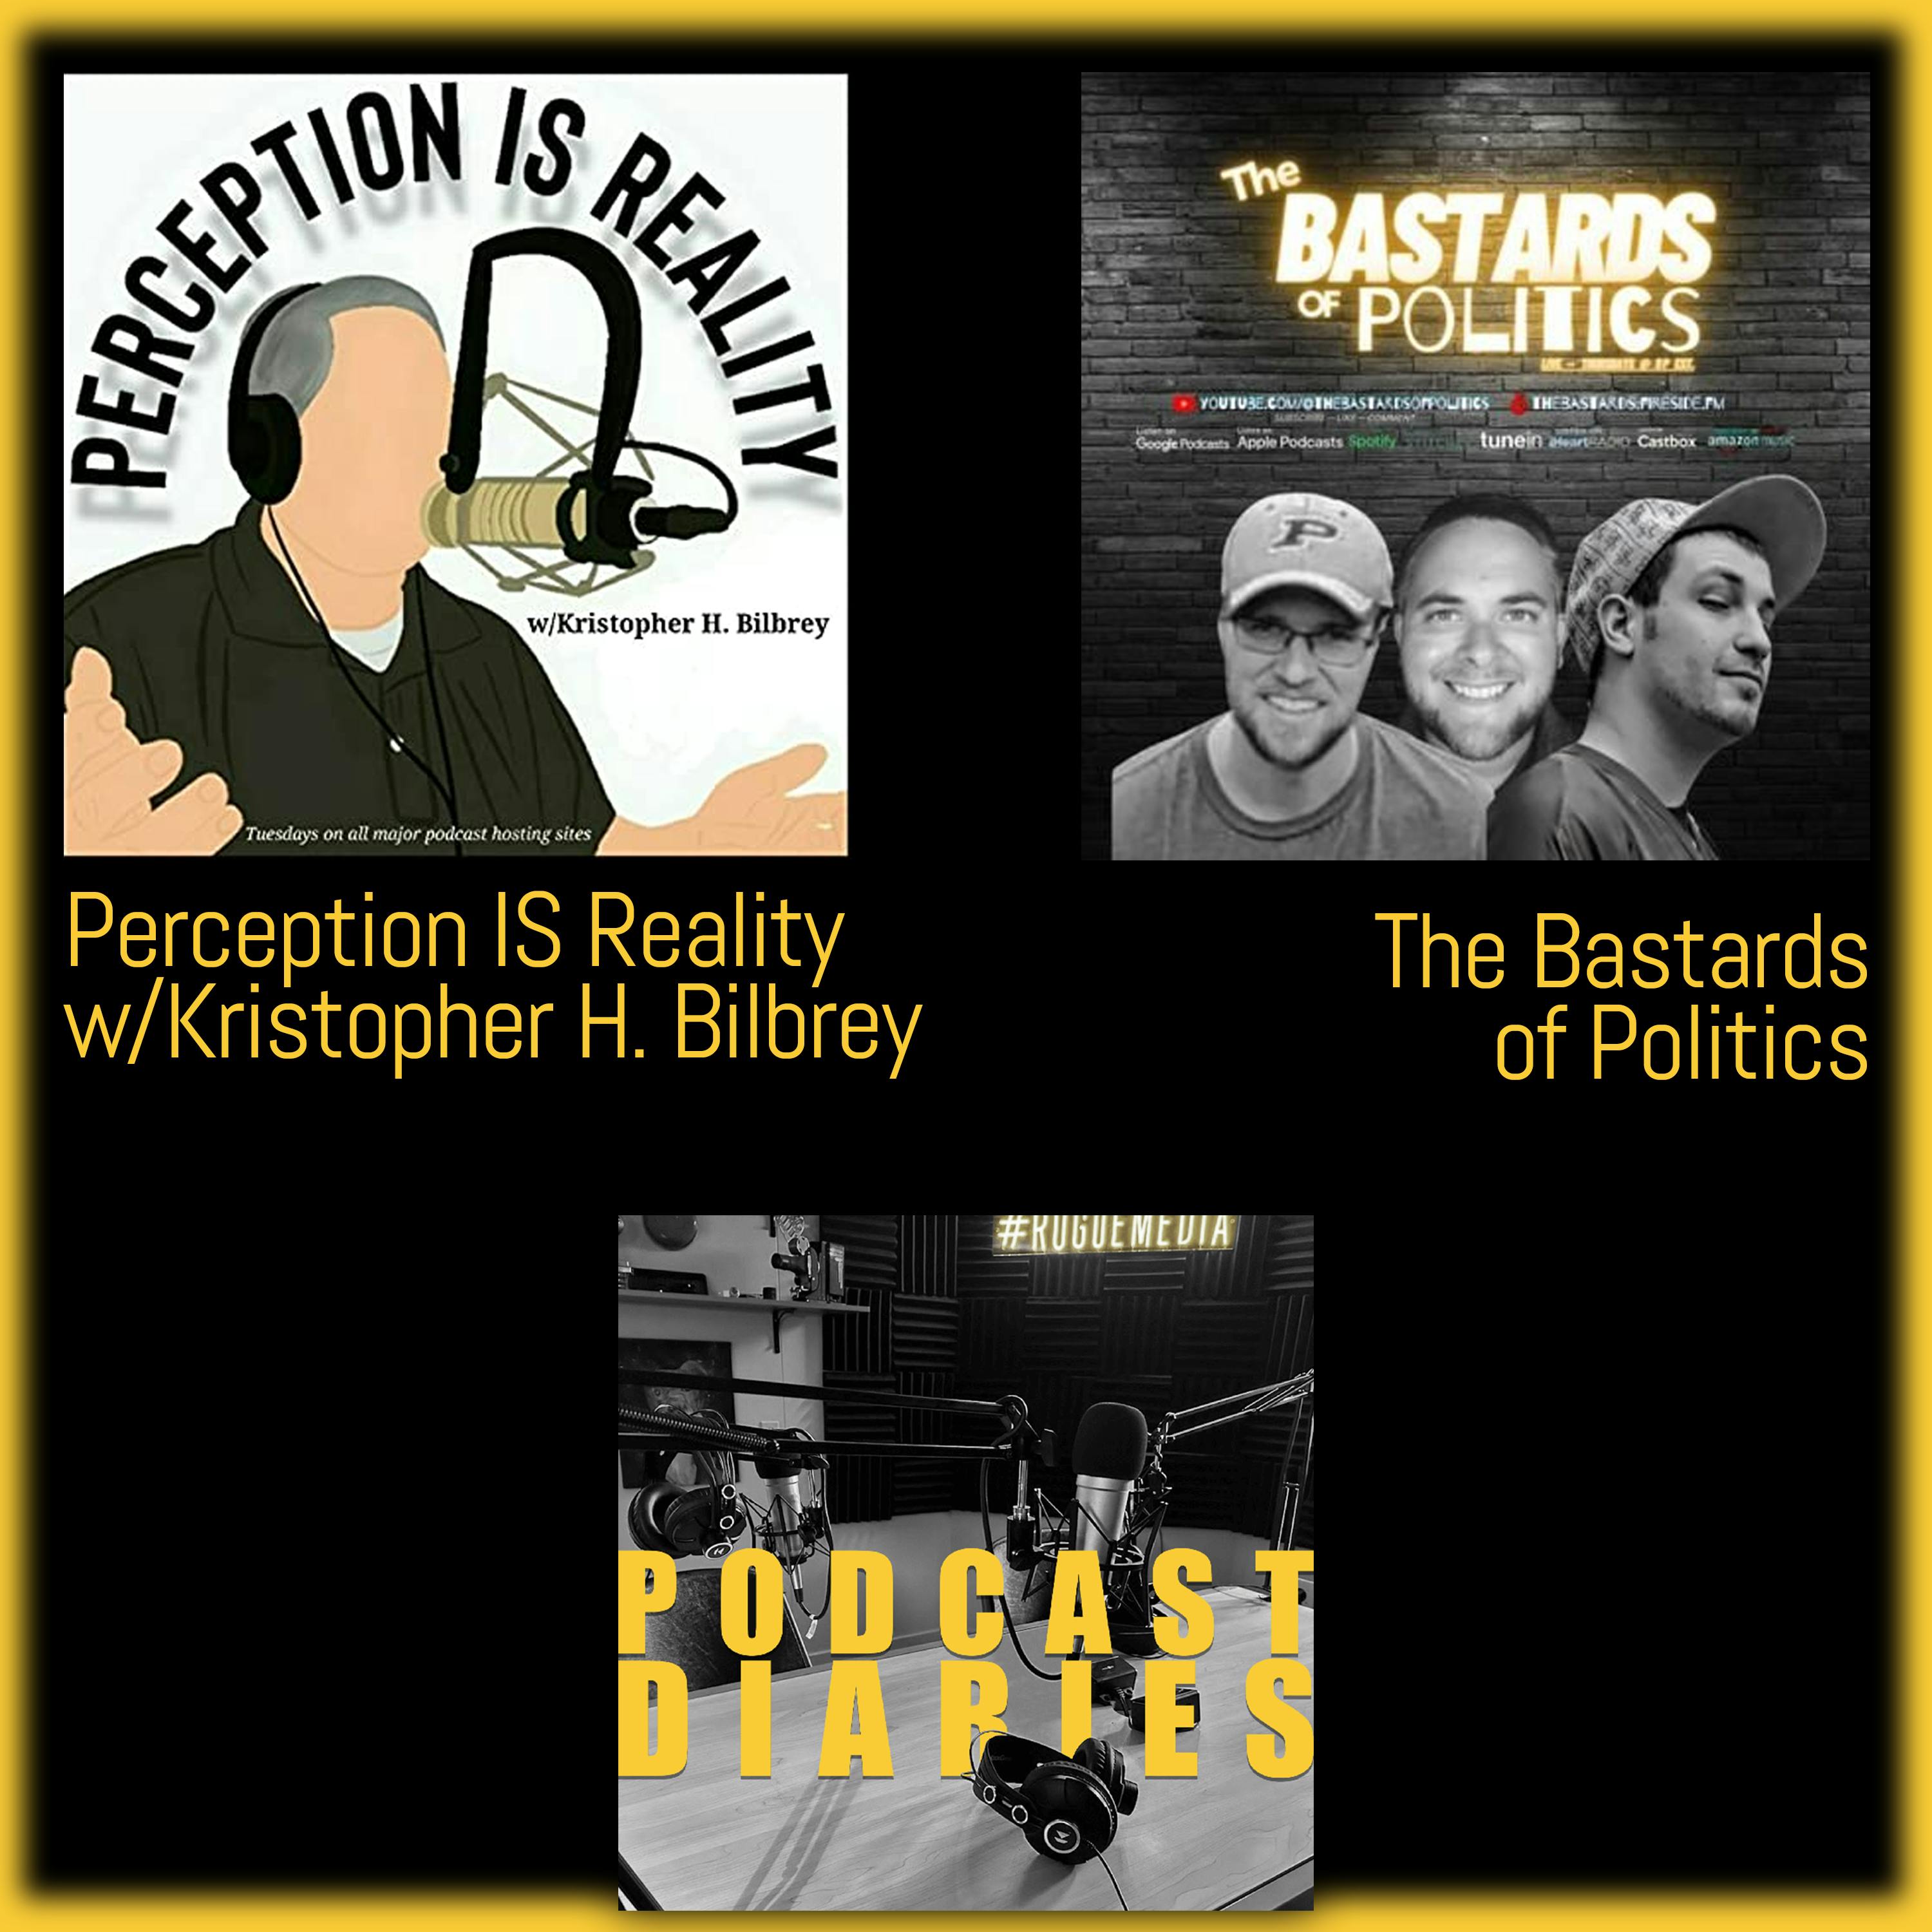 Perception IS Reality and The Bastards of Politics with Kristopher H. Bilbrey